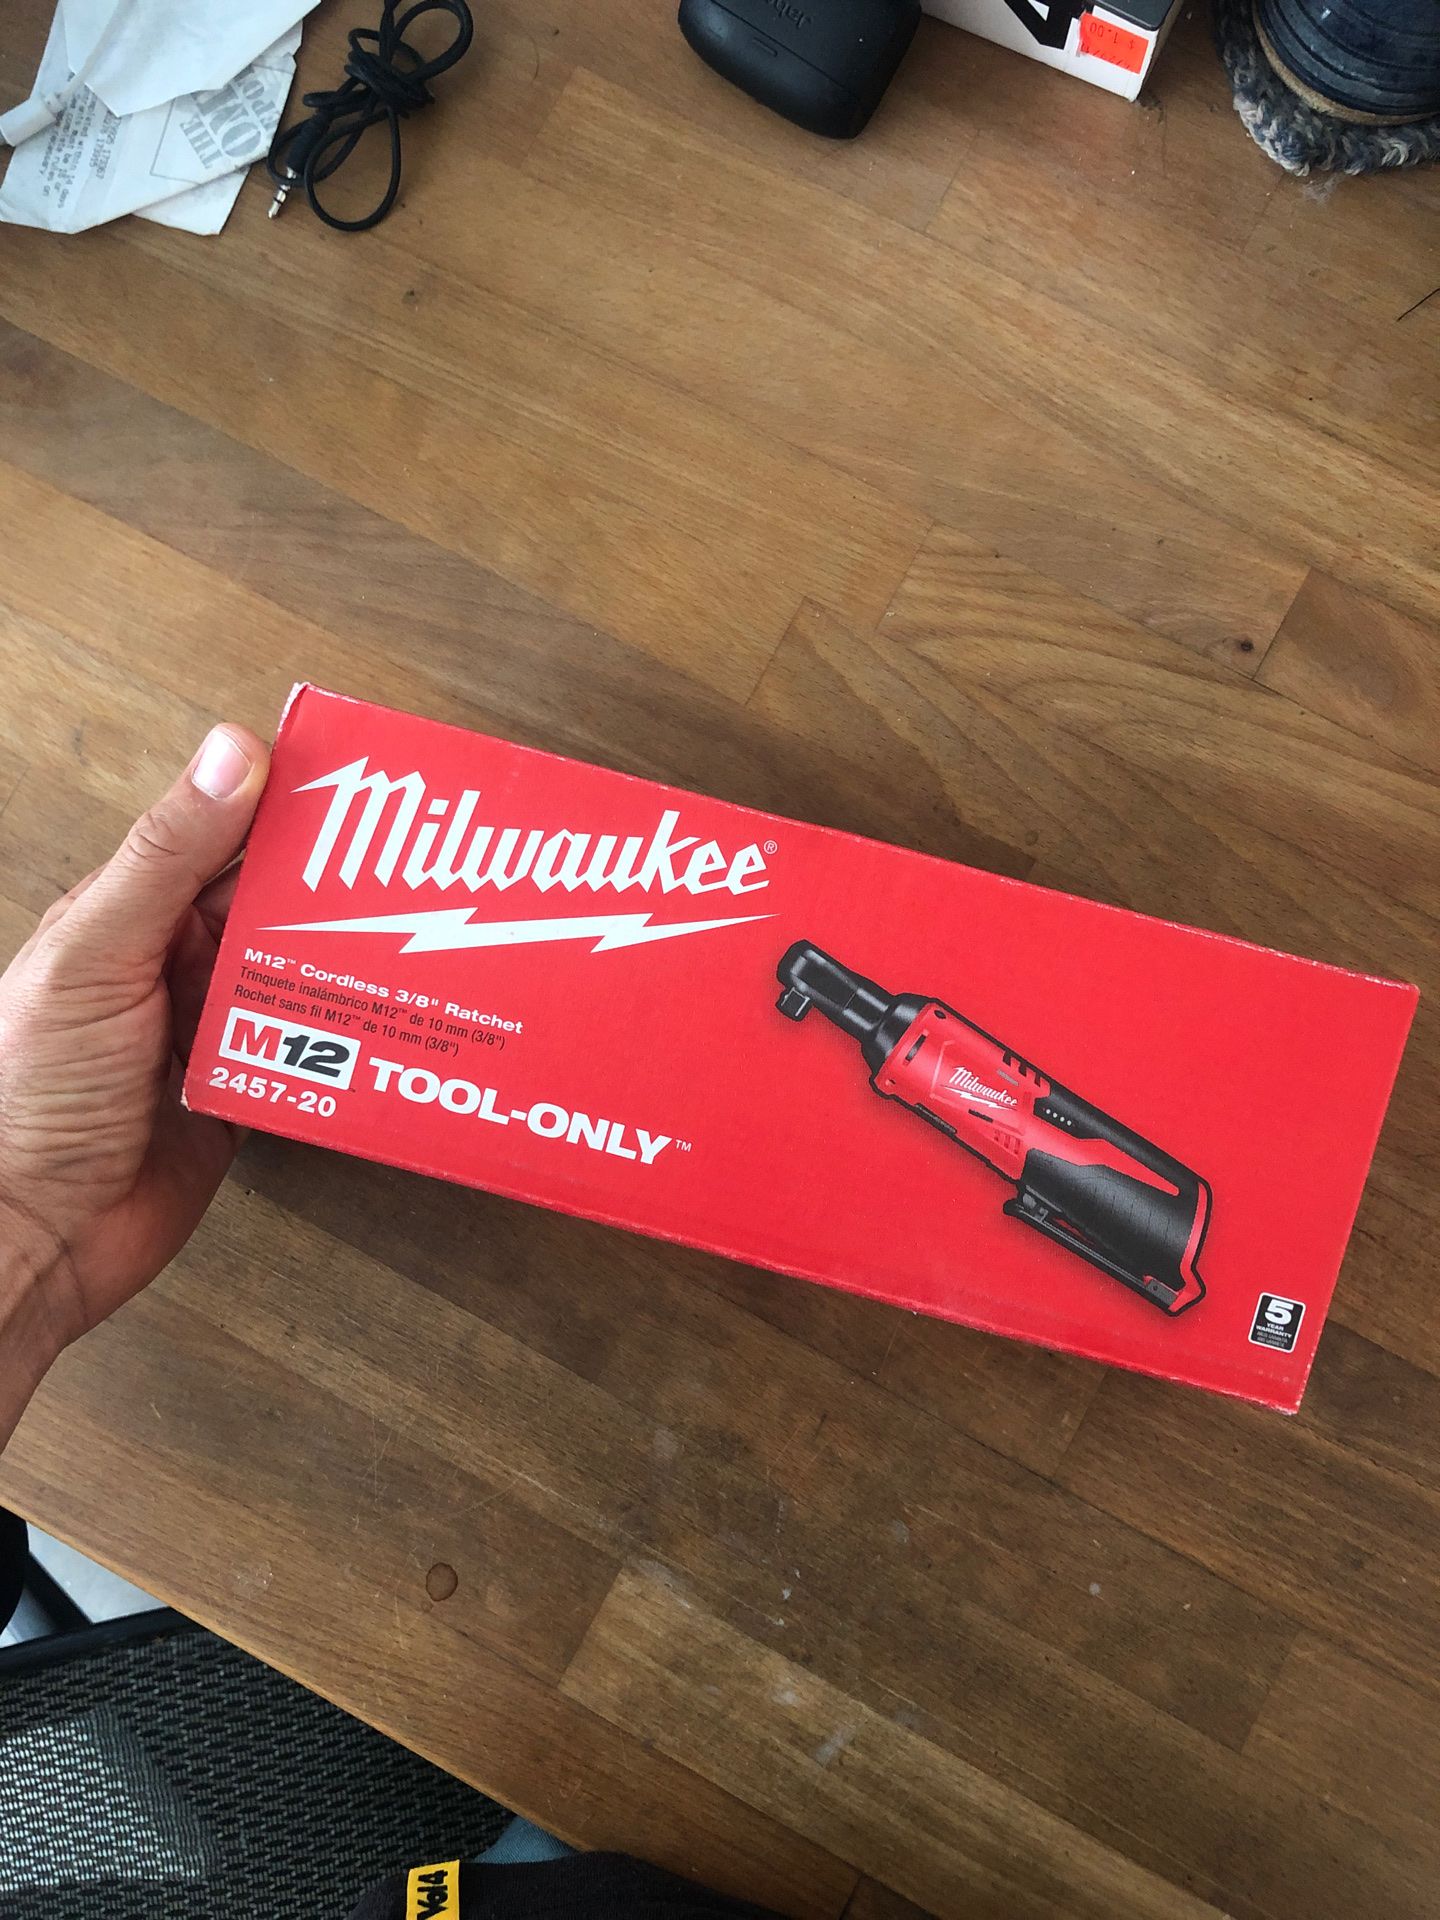 New in Box Milwaukee M12 cordless Ratchet TOOL ONLY. Model # 2457-20 No Battery Included